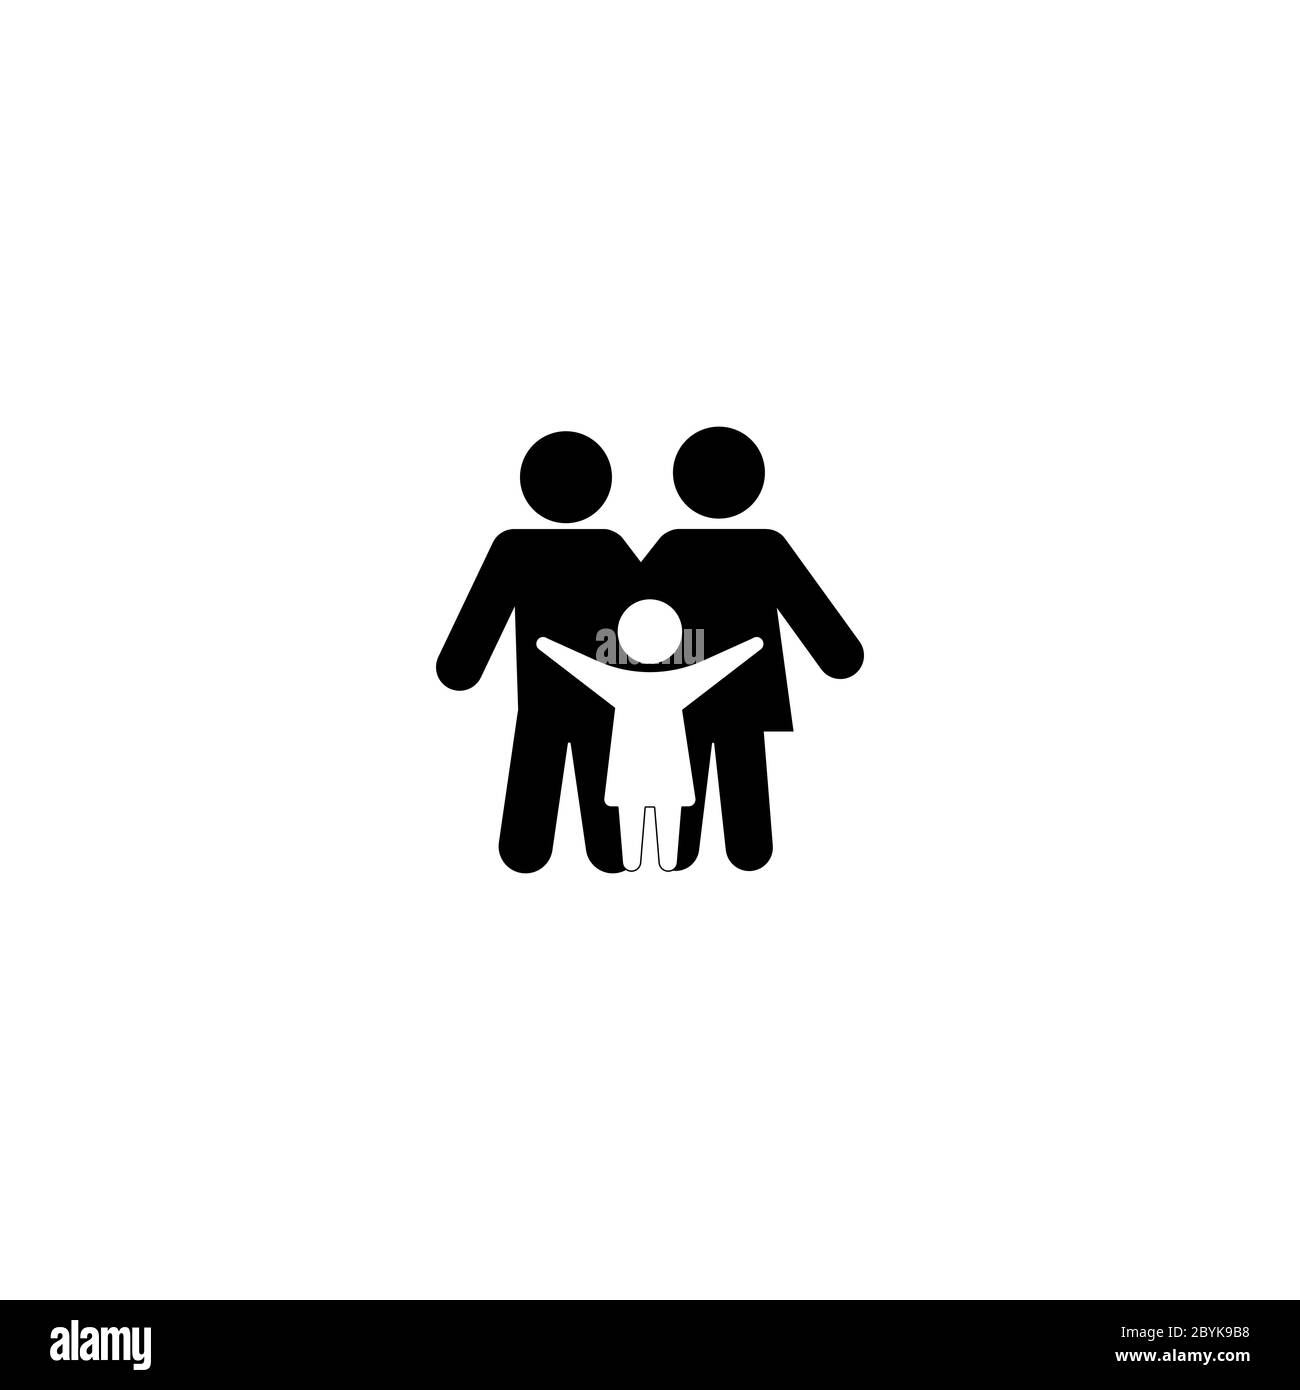 Family icon in black simple design on an isolated background. EPS 10 vector Stock Vector